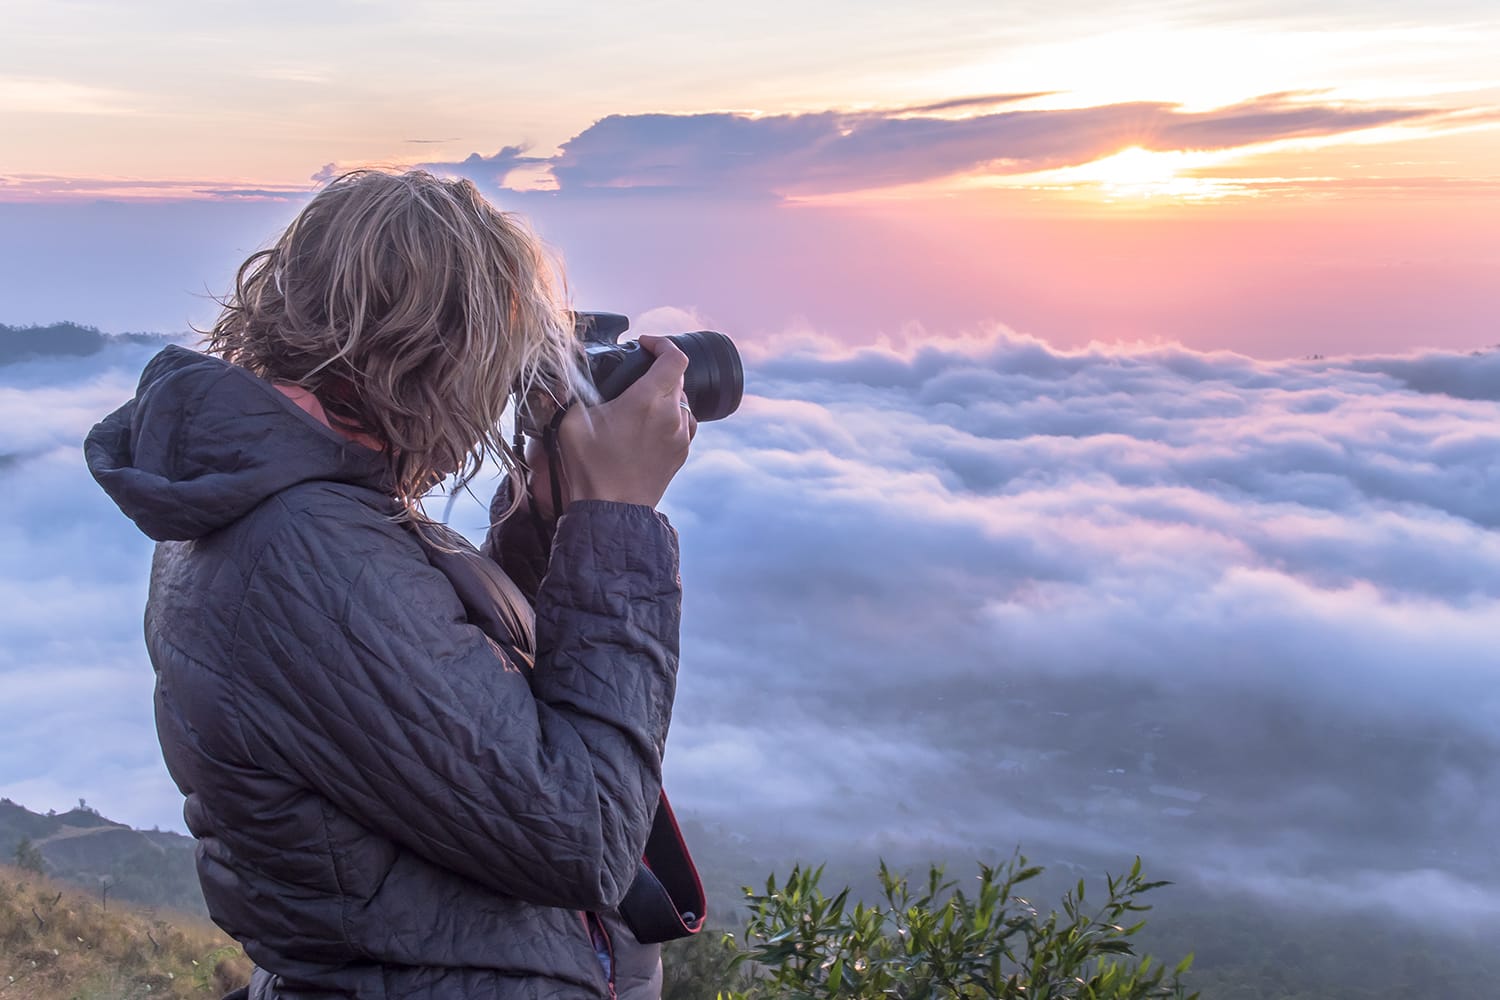 10 Things to Keep in Your Camera Bag  When Going on a Photography Adventure